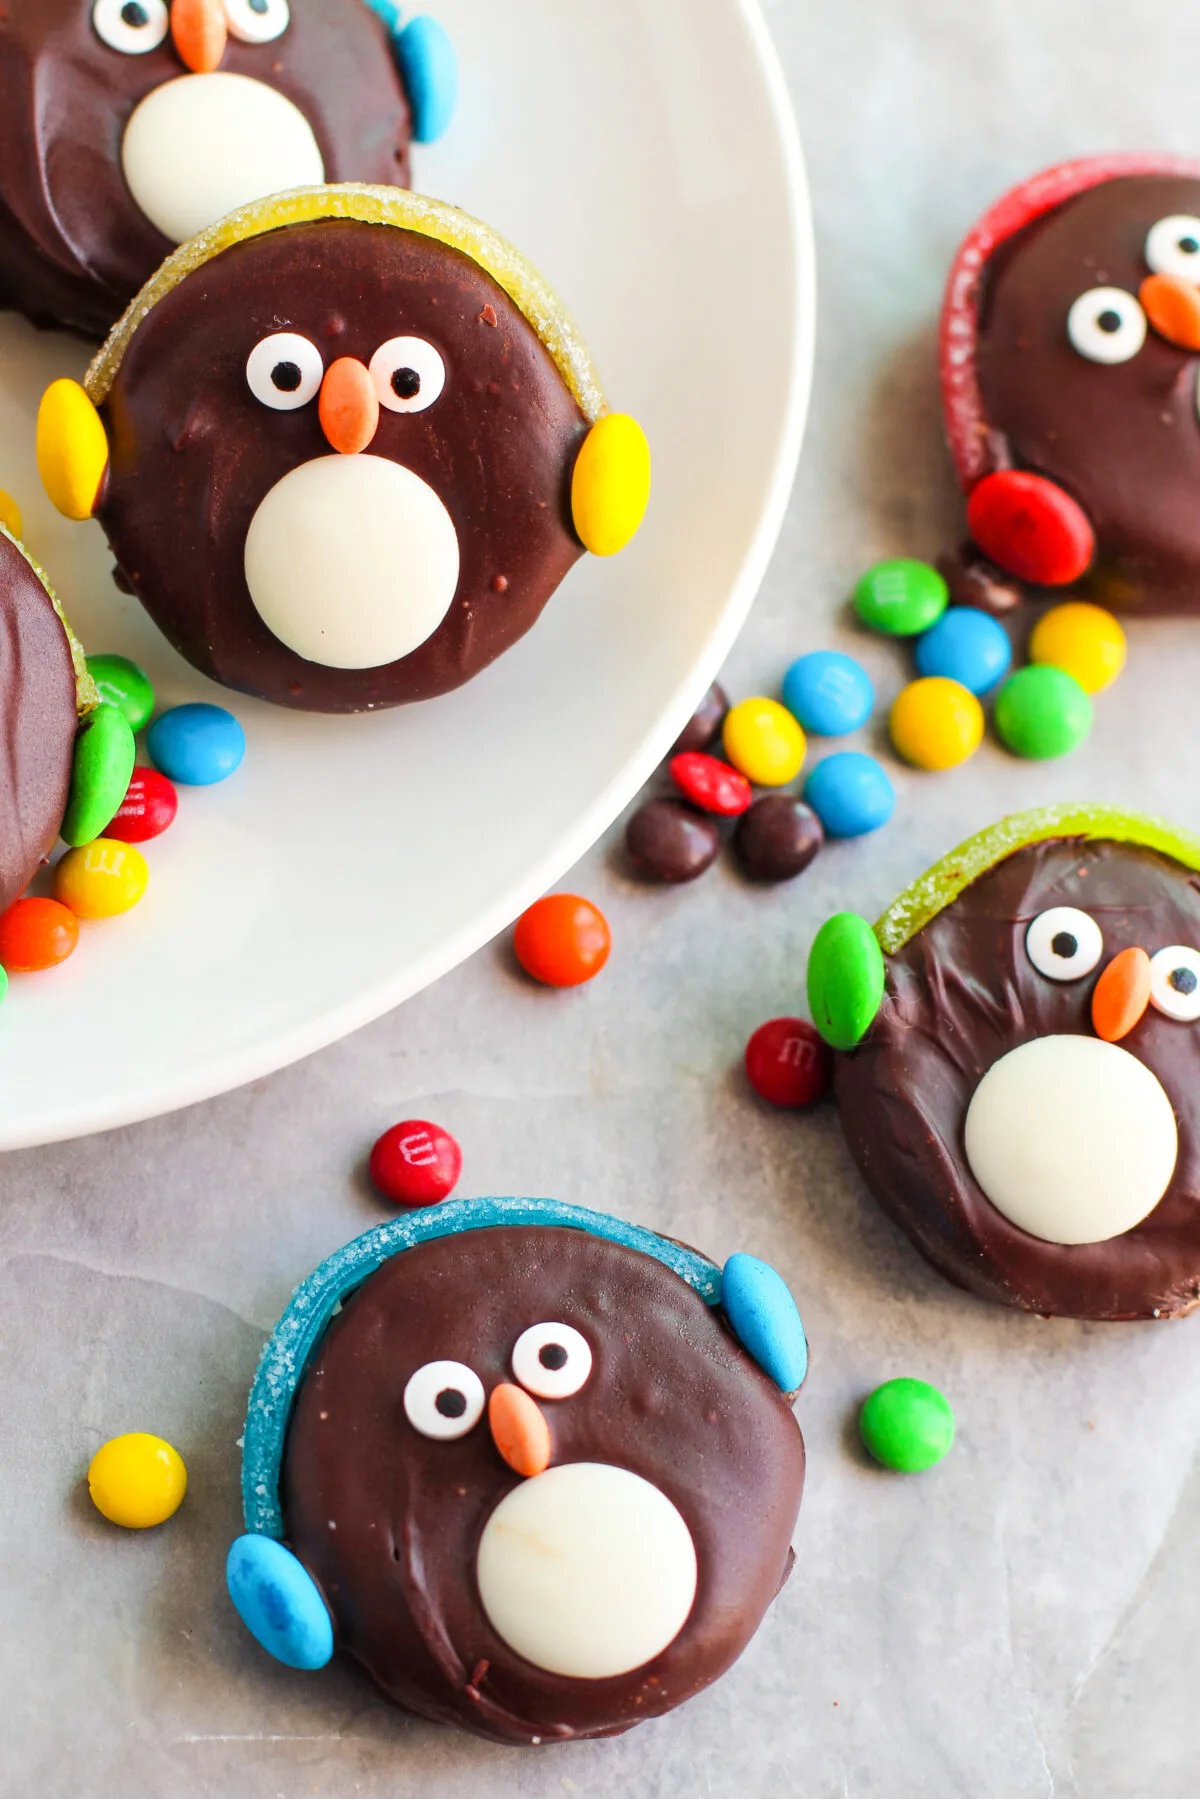 A fun recipe for kids and adults alike, these Oreo penguin cookies are a perfect addition to your holiday cookie platter.